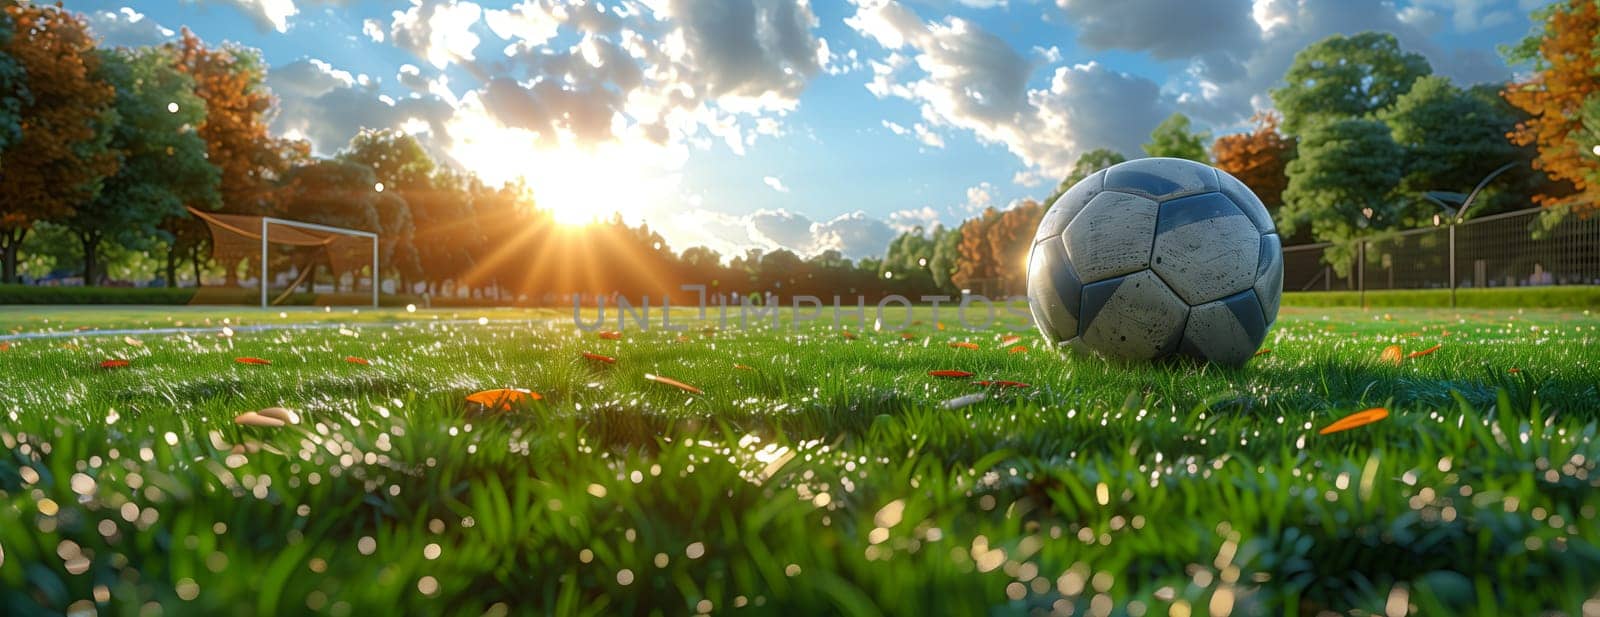 The lush green field is adorned with a soccer ball, creating a beautiful natural landscape. The sky is clear with a few fluffy clouds, perfect for a game of soccer